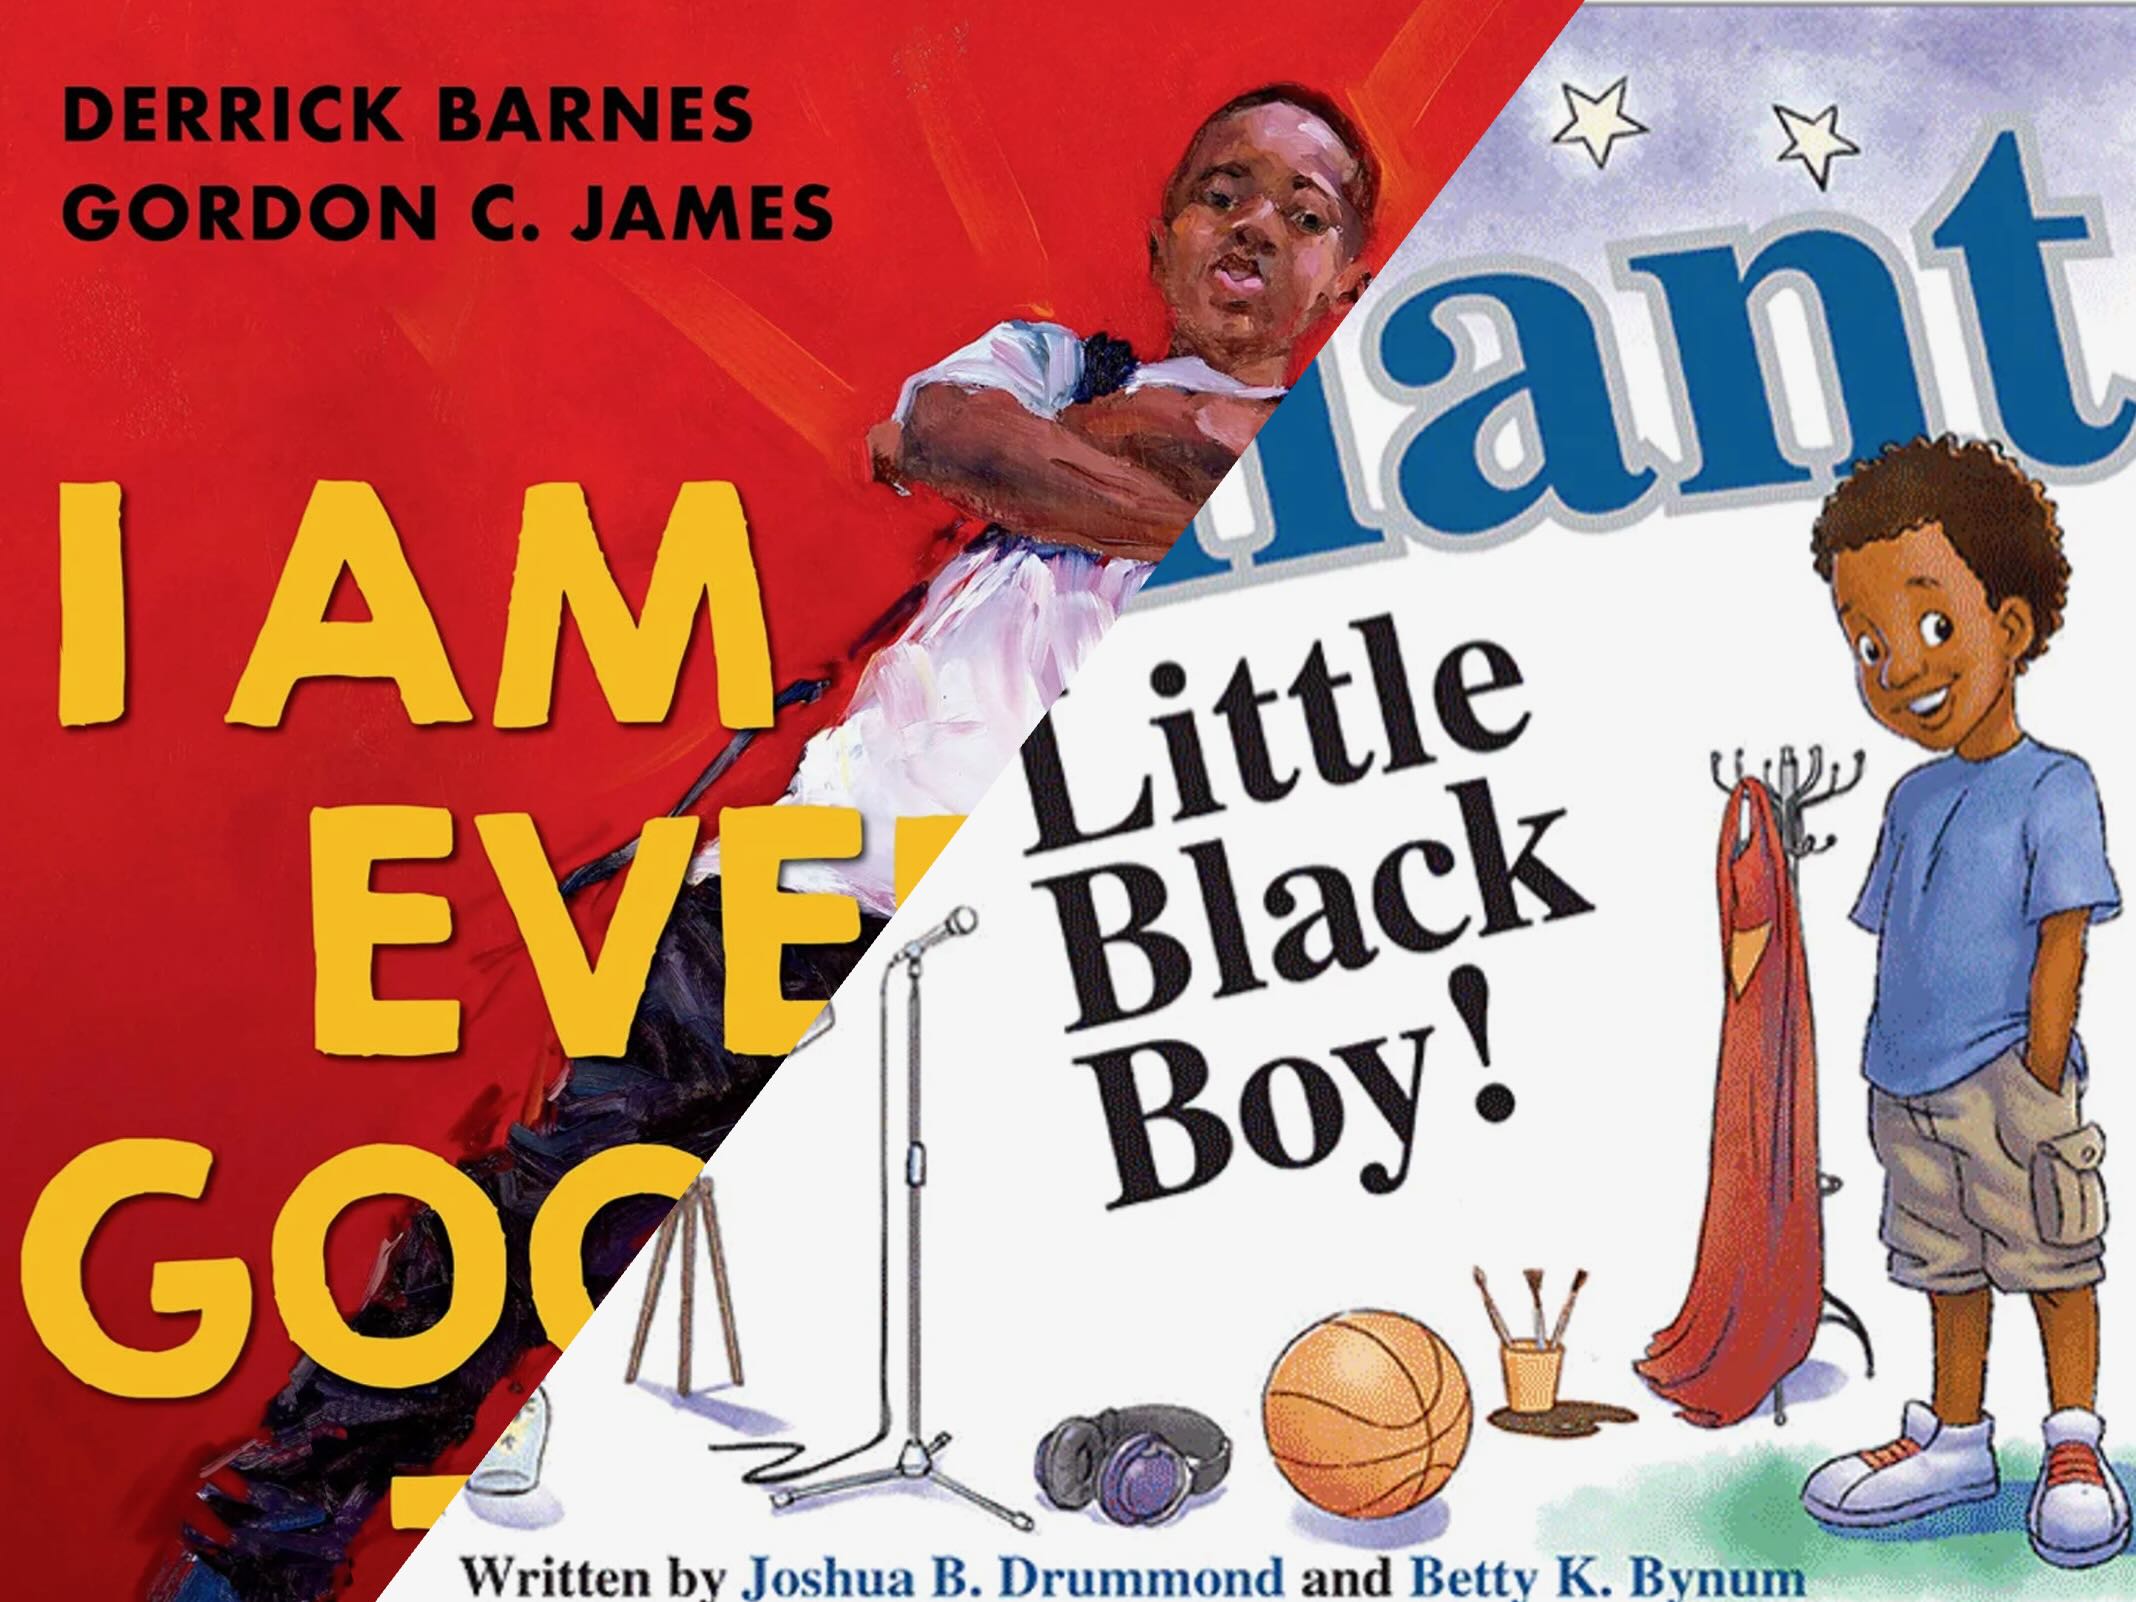 Book cover of "I'm a Brilliant Little Black Boy!" (horizontal, purple background, showcasing a smiling boy on the side with different artifacts on the ground) and "I Am Every Good Thing" (vertical, red background, only showcasing a boy with his arms crossed across the cover).